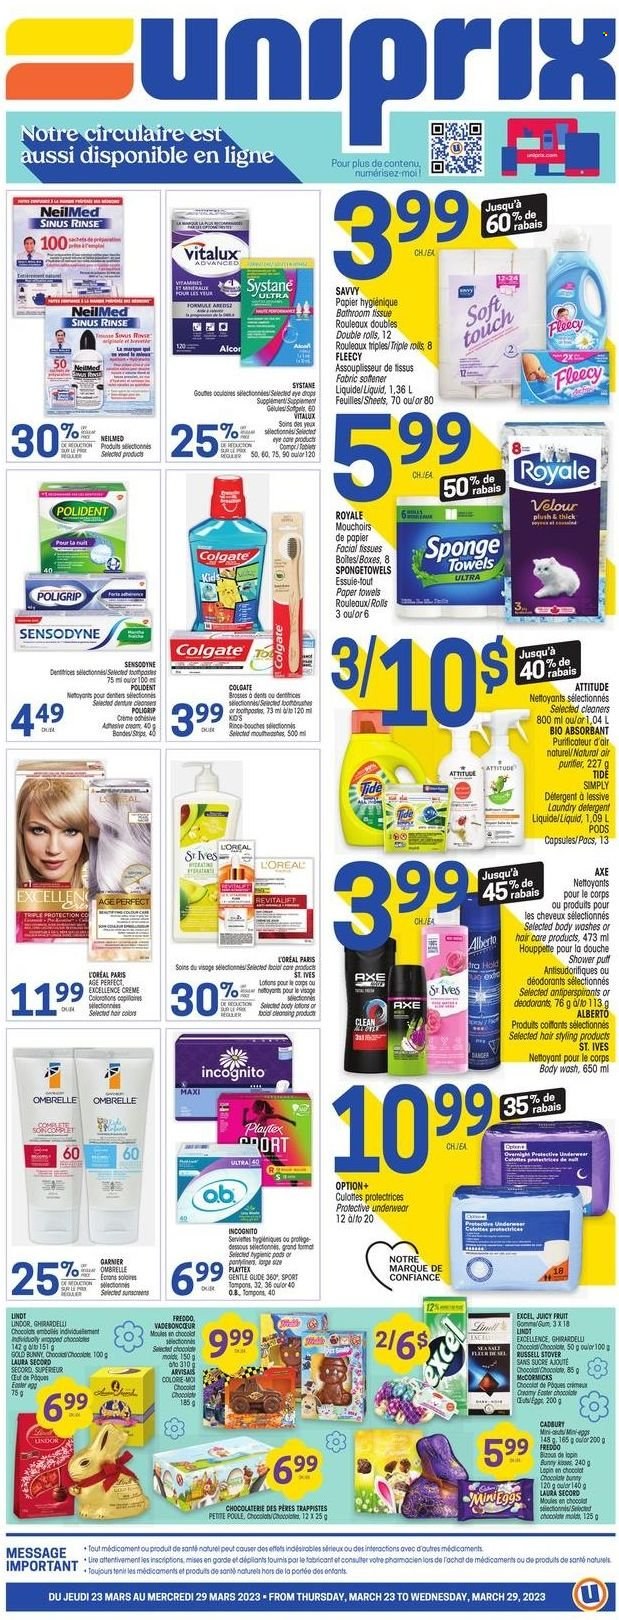 thumbnail - Uniprix Flyer - March 23, 2023 - March 29, 2023 - Sales products - chocolate, Mars, Cadbury, Ghirardelli, kitchen towels, paper towels, Tide, fabric softener, laundry detergent, body wash, Polident, Playtex, pantyliners, tampons, L’Oréal, Axe, eye drops, detergent, Colgate, Garnier, Systane, Sensodyne, Lindt, Lindor, deodorant. Page 1.